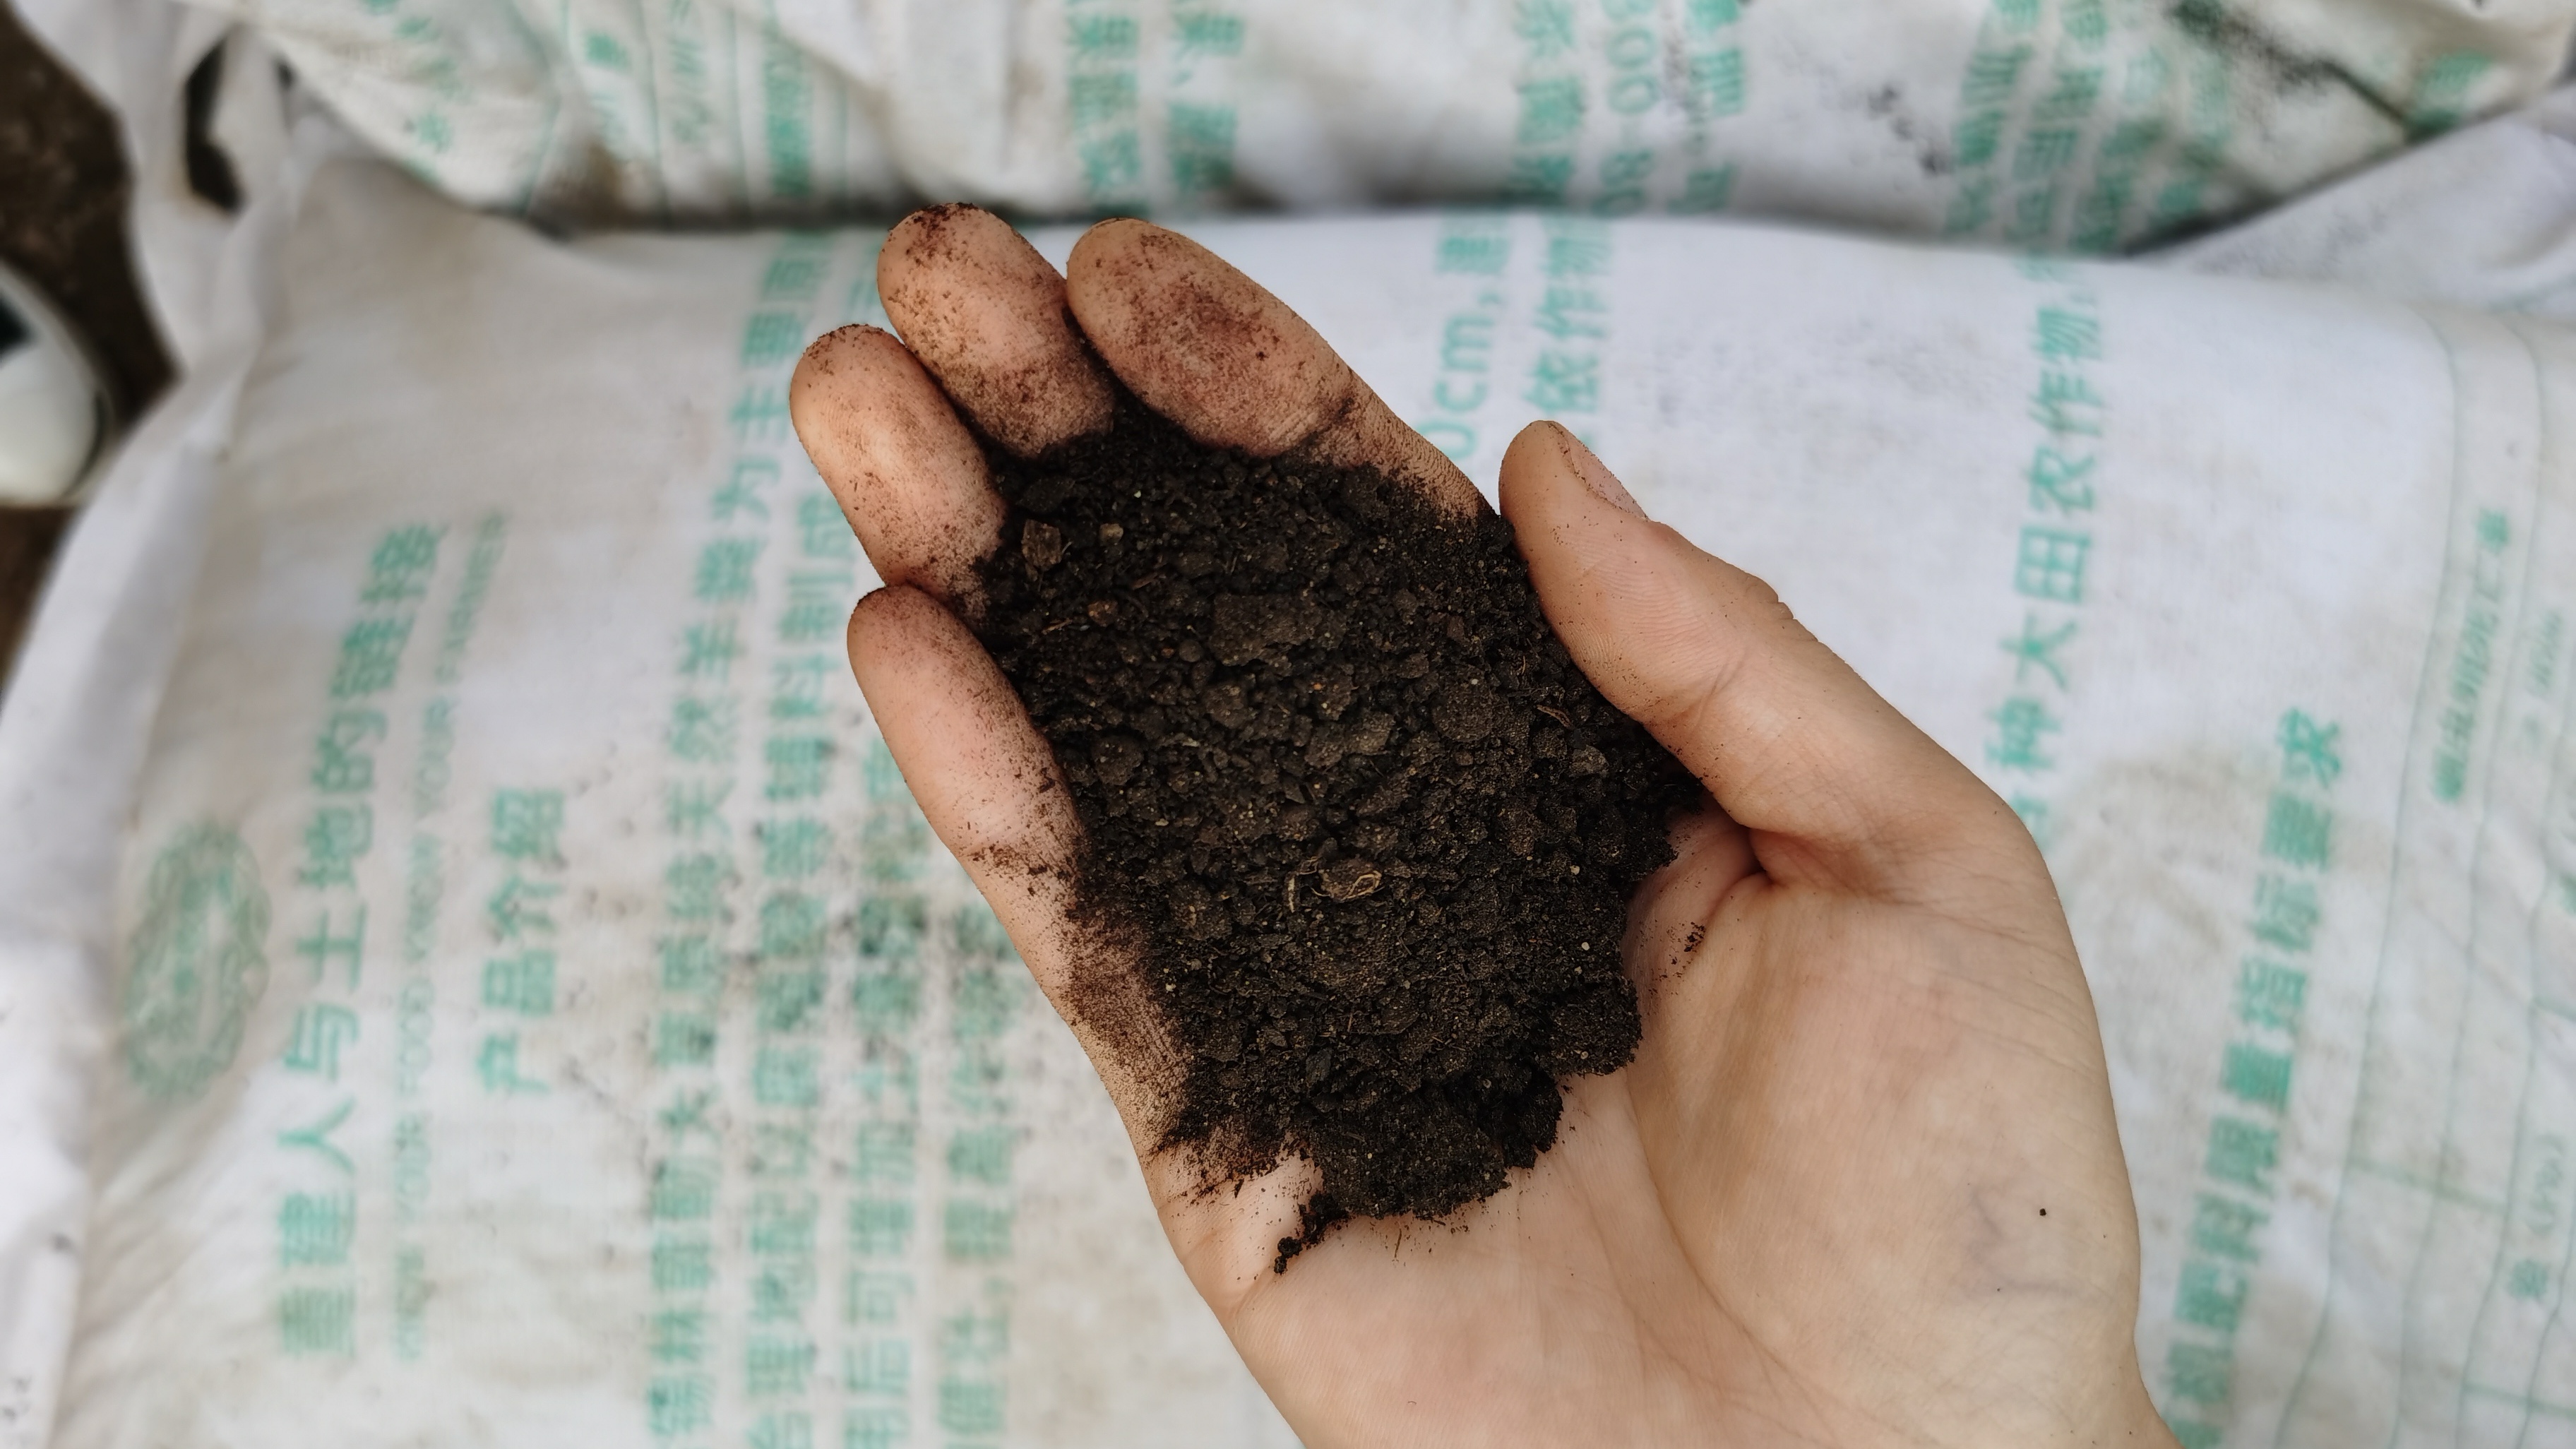 Odorless organic fertilizer used on the Shared Harvest farm, Beijing, China, March 28, 2023. /CGTN